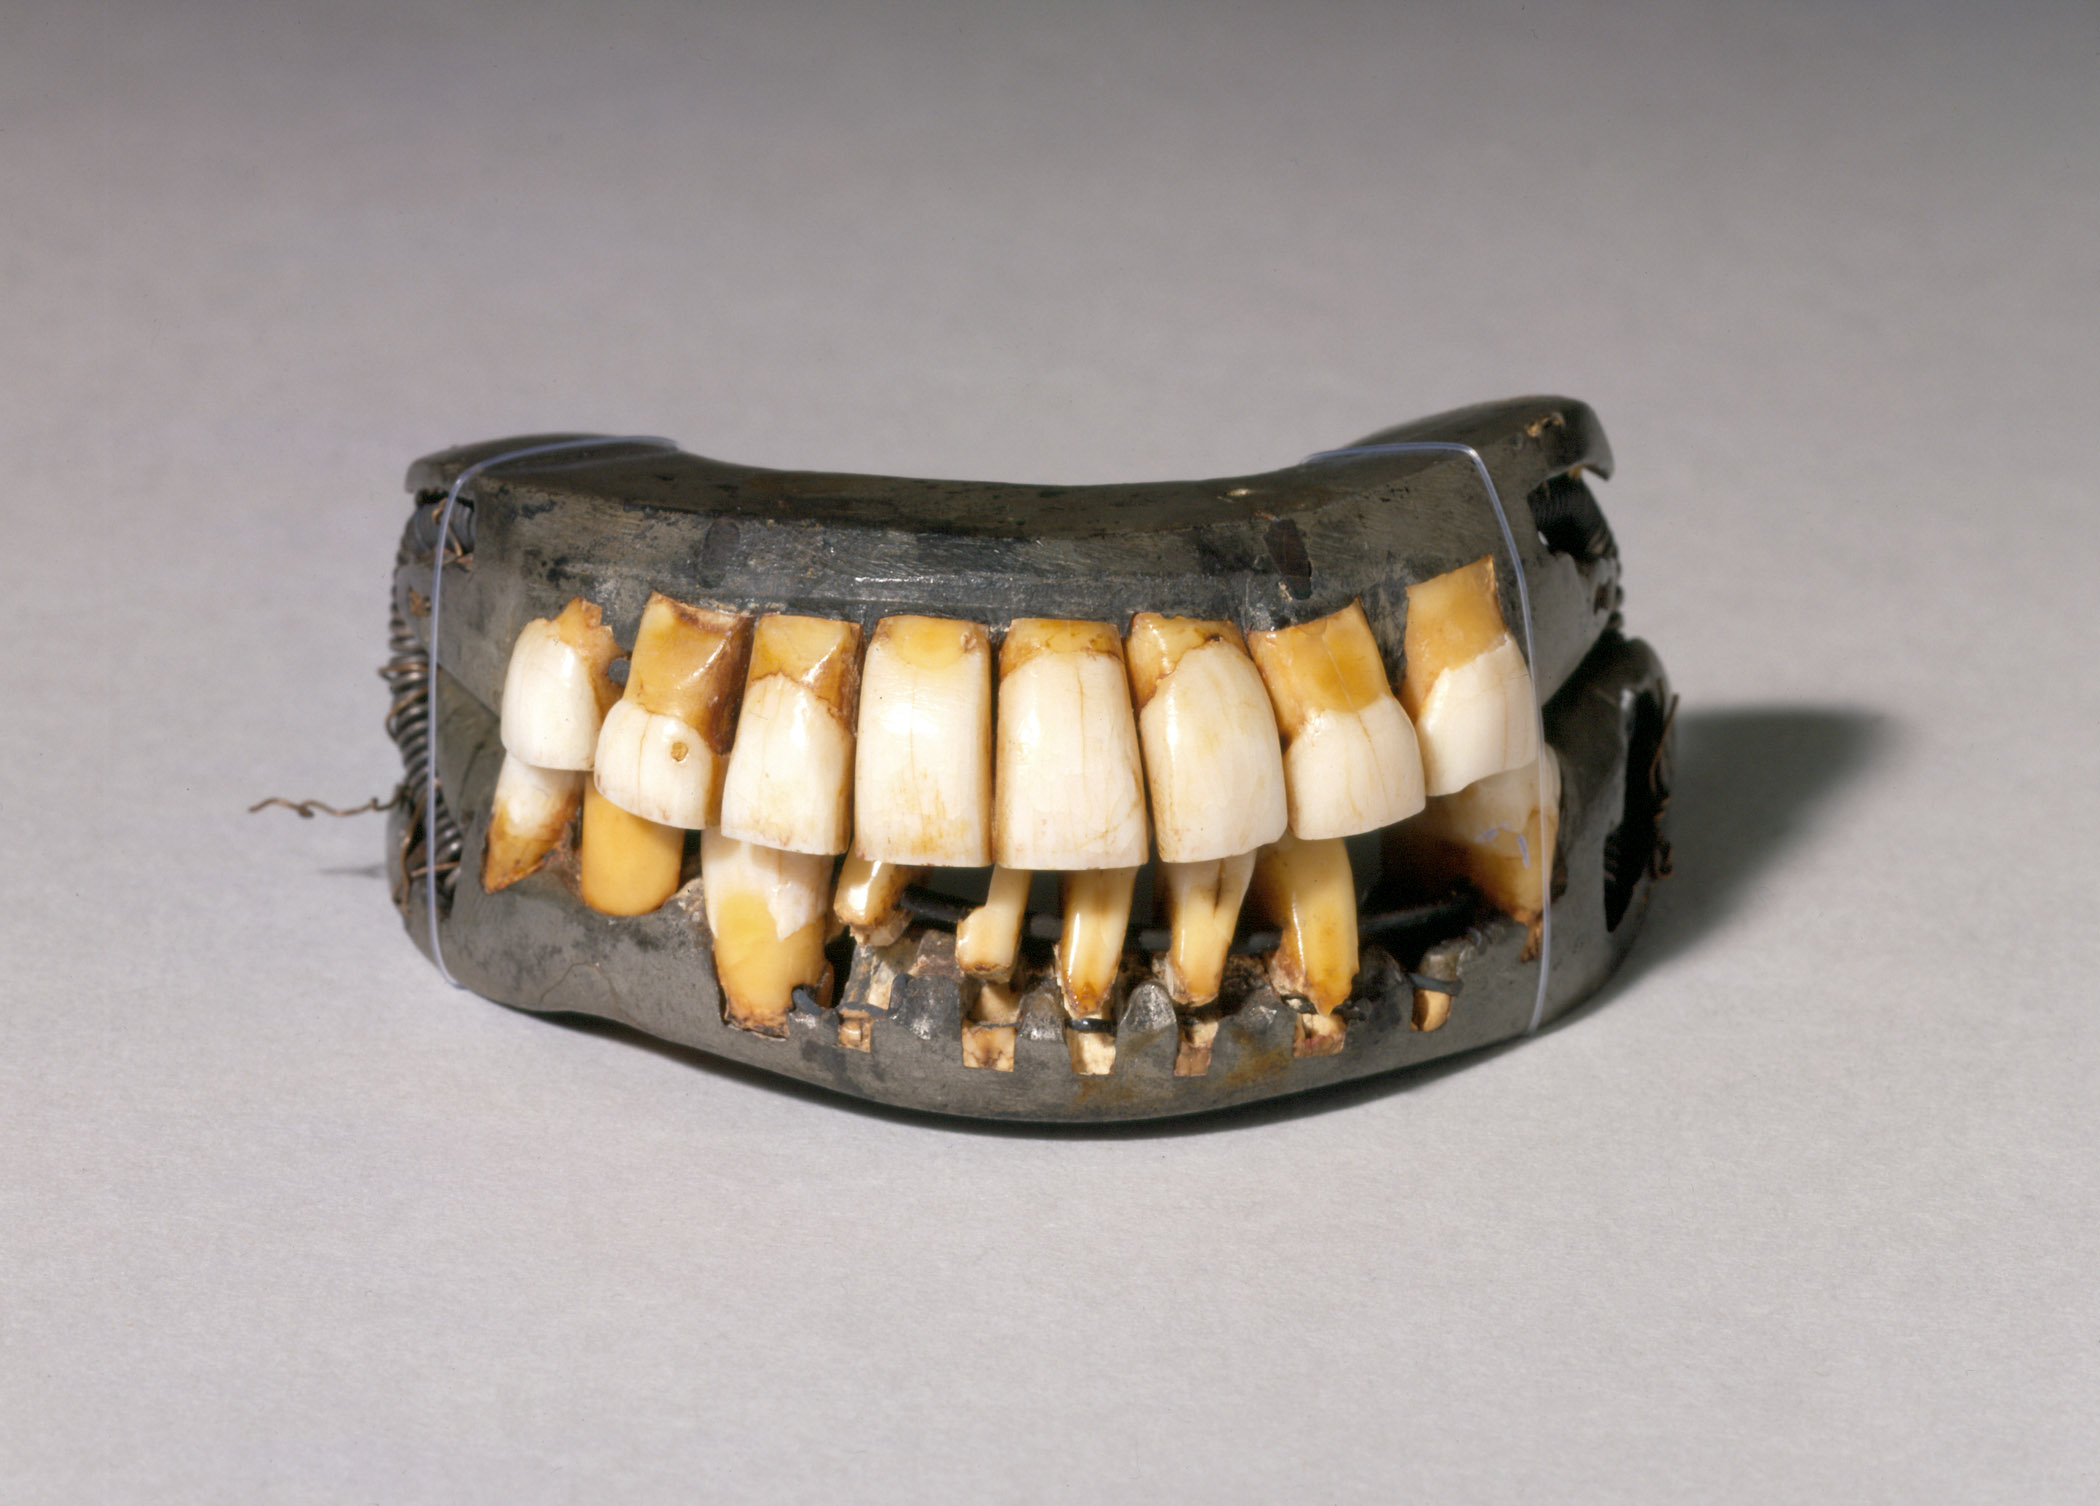 George Washington’s Chompers | Michelle Wright's Blog2100 x 1506